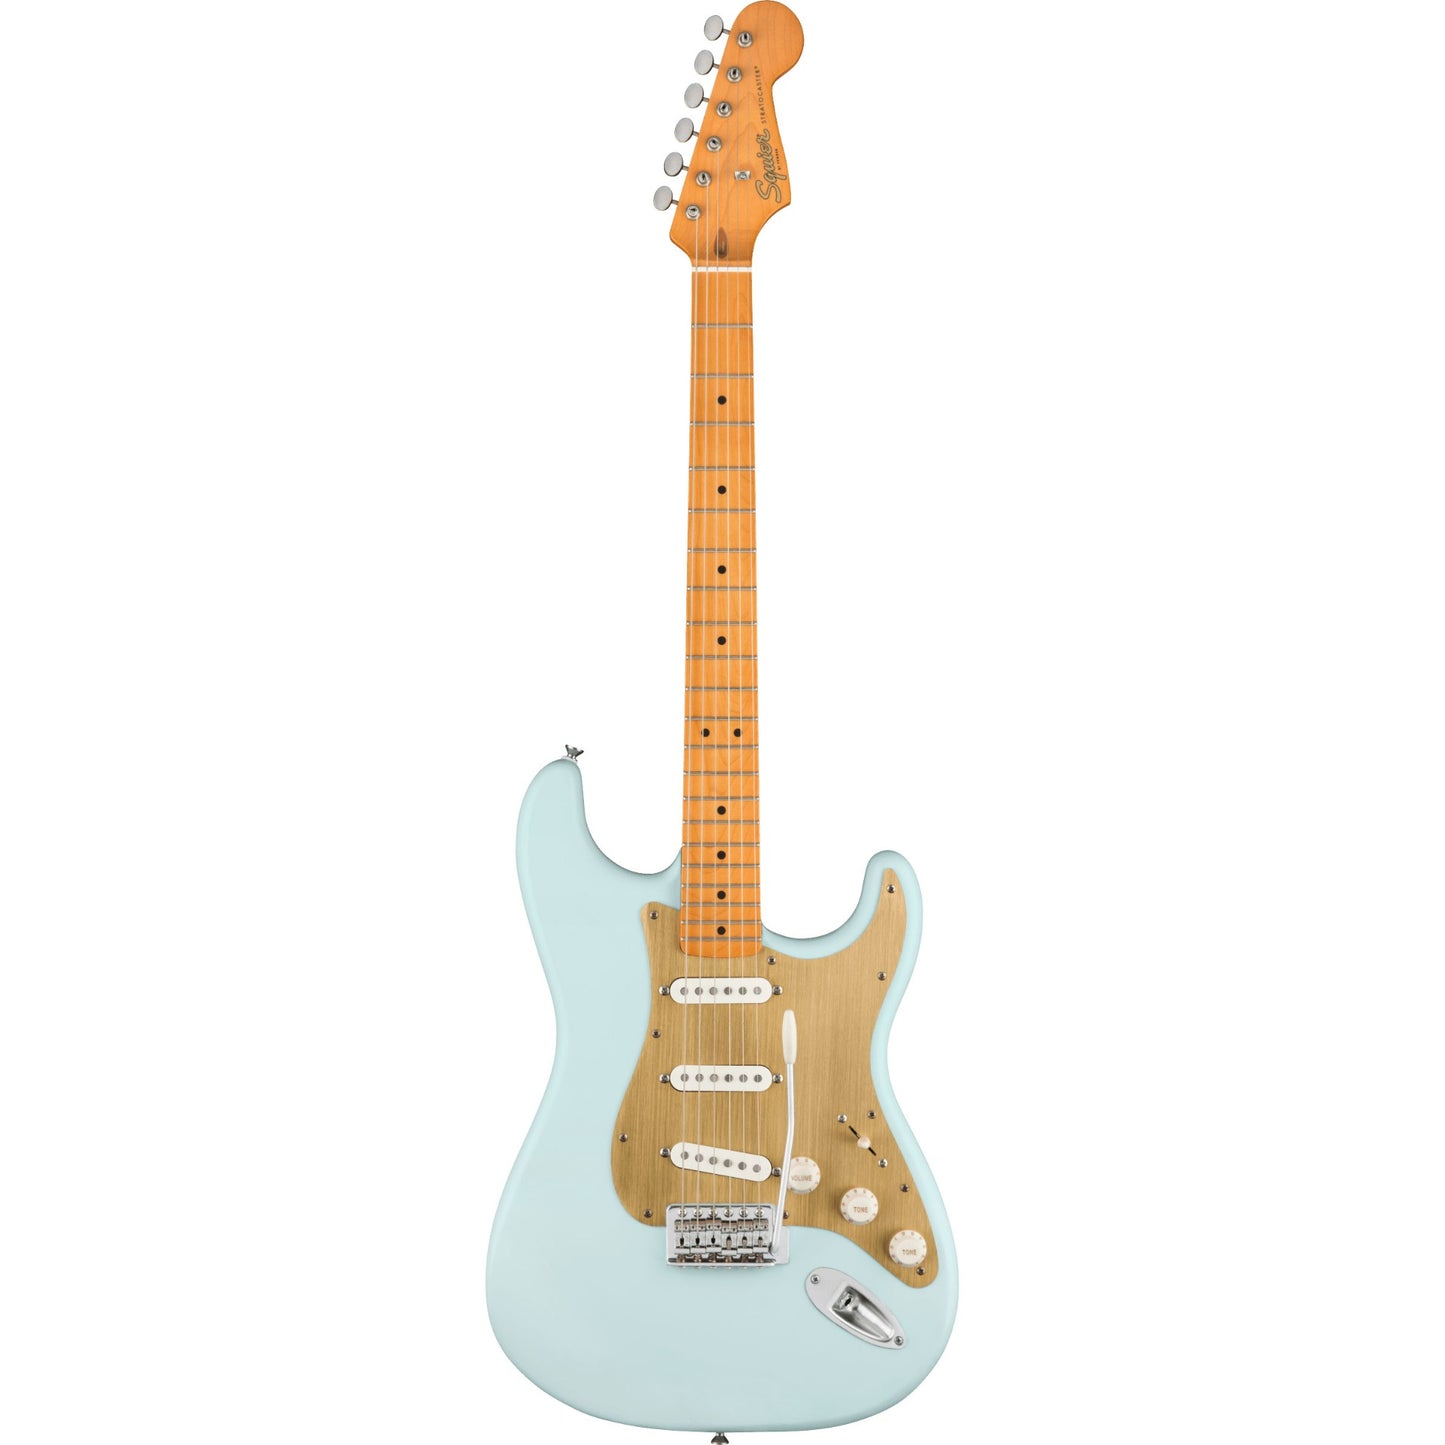 Squier 40th Anniversary Stratocaster, Vintage Edition, Satin Sonic Blue